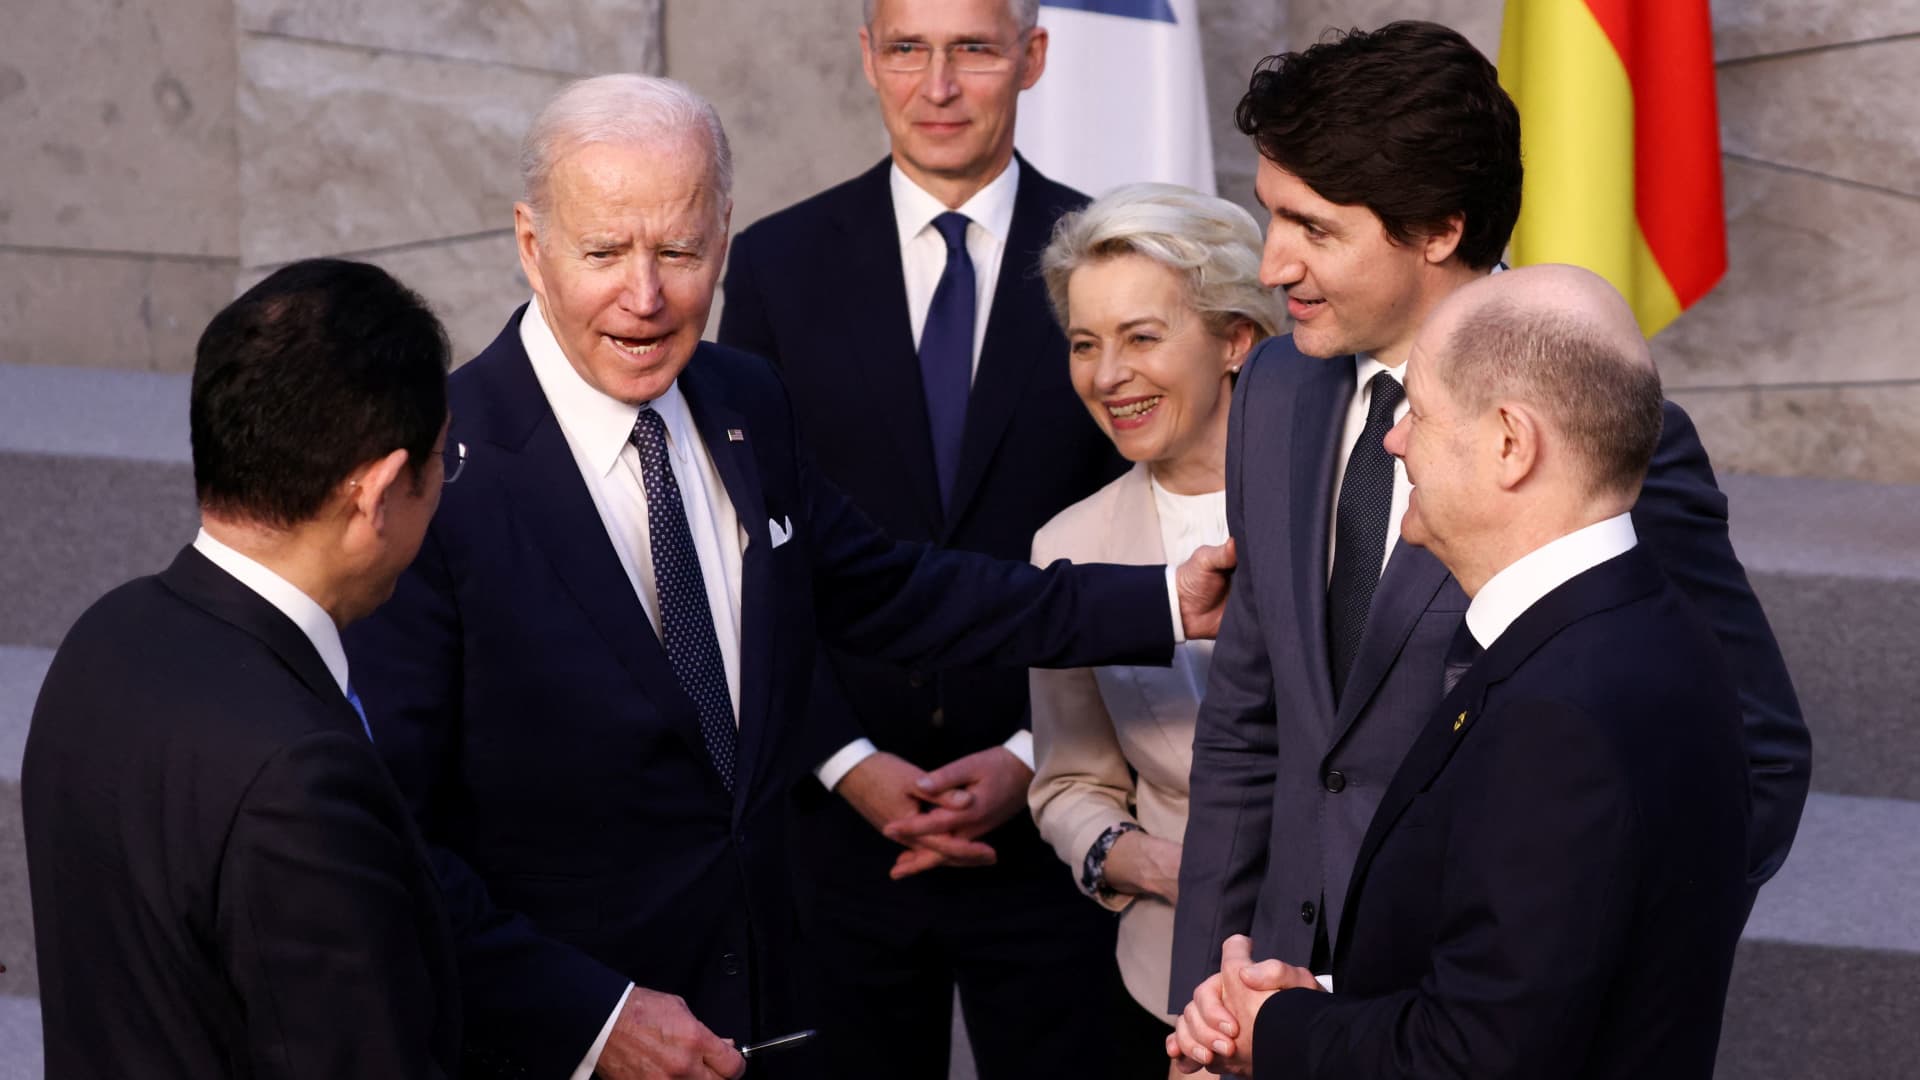 U.S. President Joe Biden speaks with Japan's Prime Minister Fumio Kishida, Germany's Chancellor Olaf Scholz, Canada's Prime Minister Justin Trudeau, European Commission President Ursula von der Leyen and NATO Secretary General Jens Stoltenberg before a G7 leaders' family photo during a NATO summit on Russia's invasion of Ukraine, at the alliance's headquarters in Brussels, Belgium March 24, 2022.